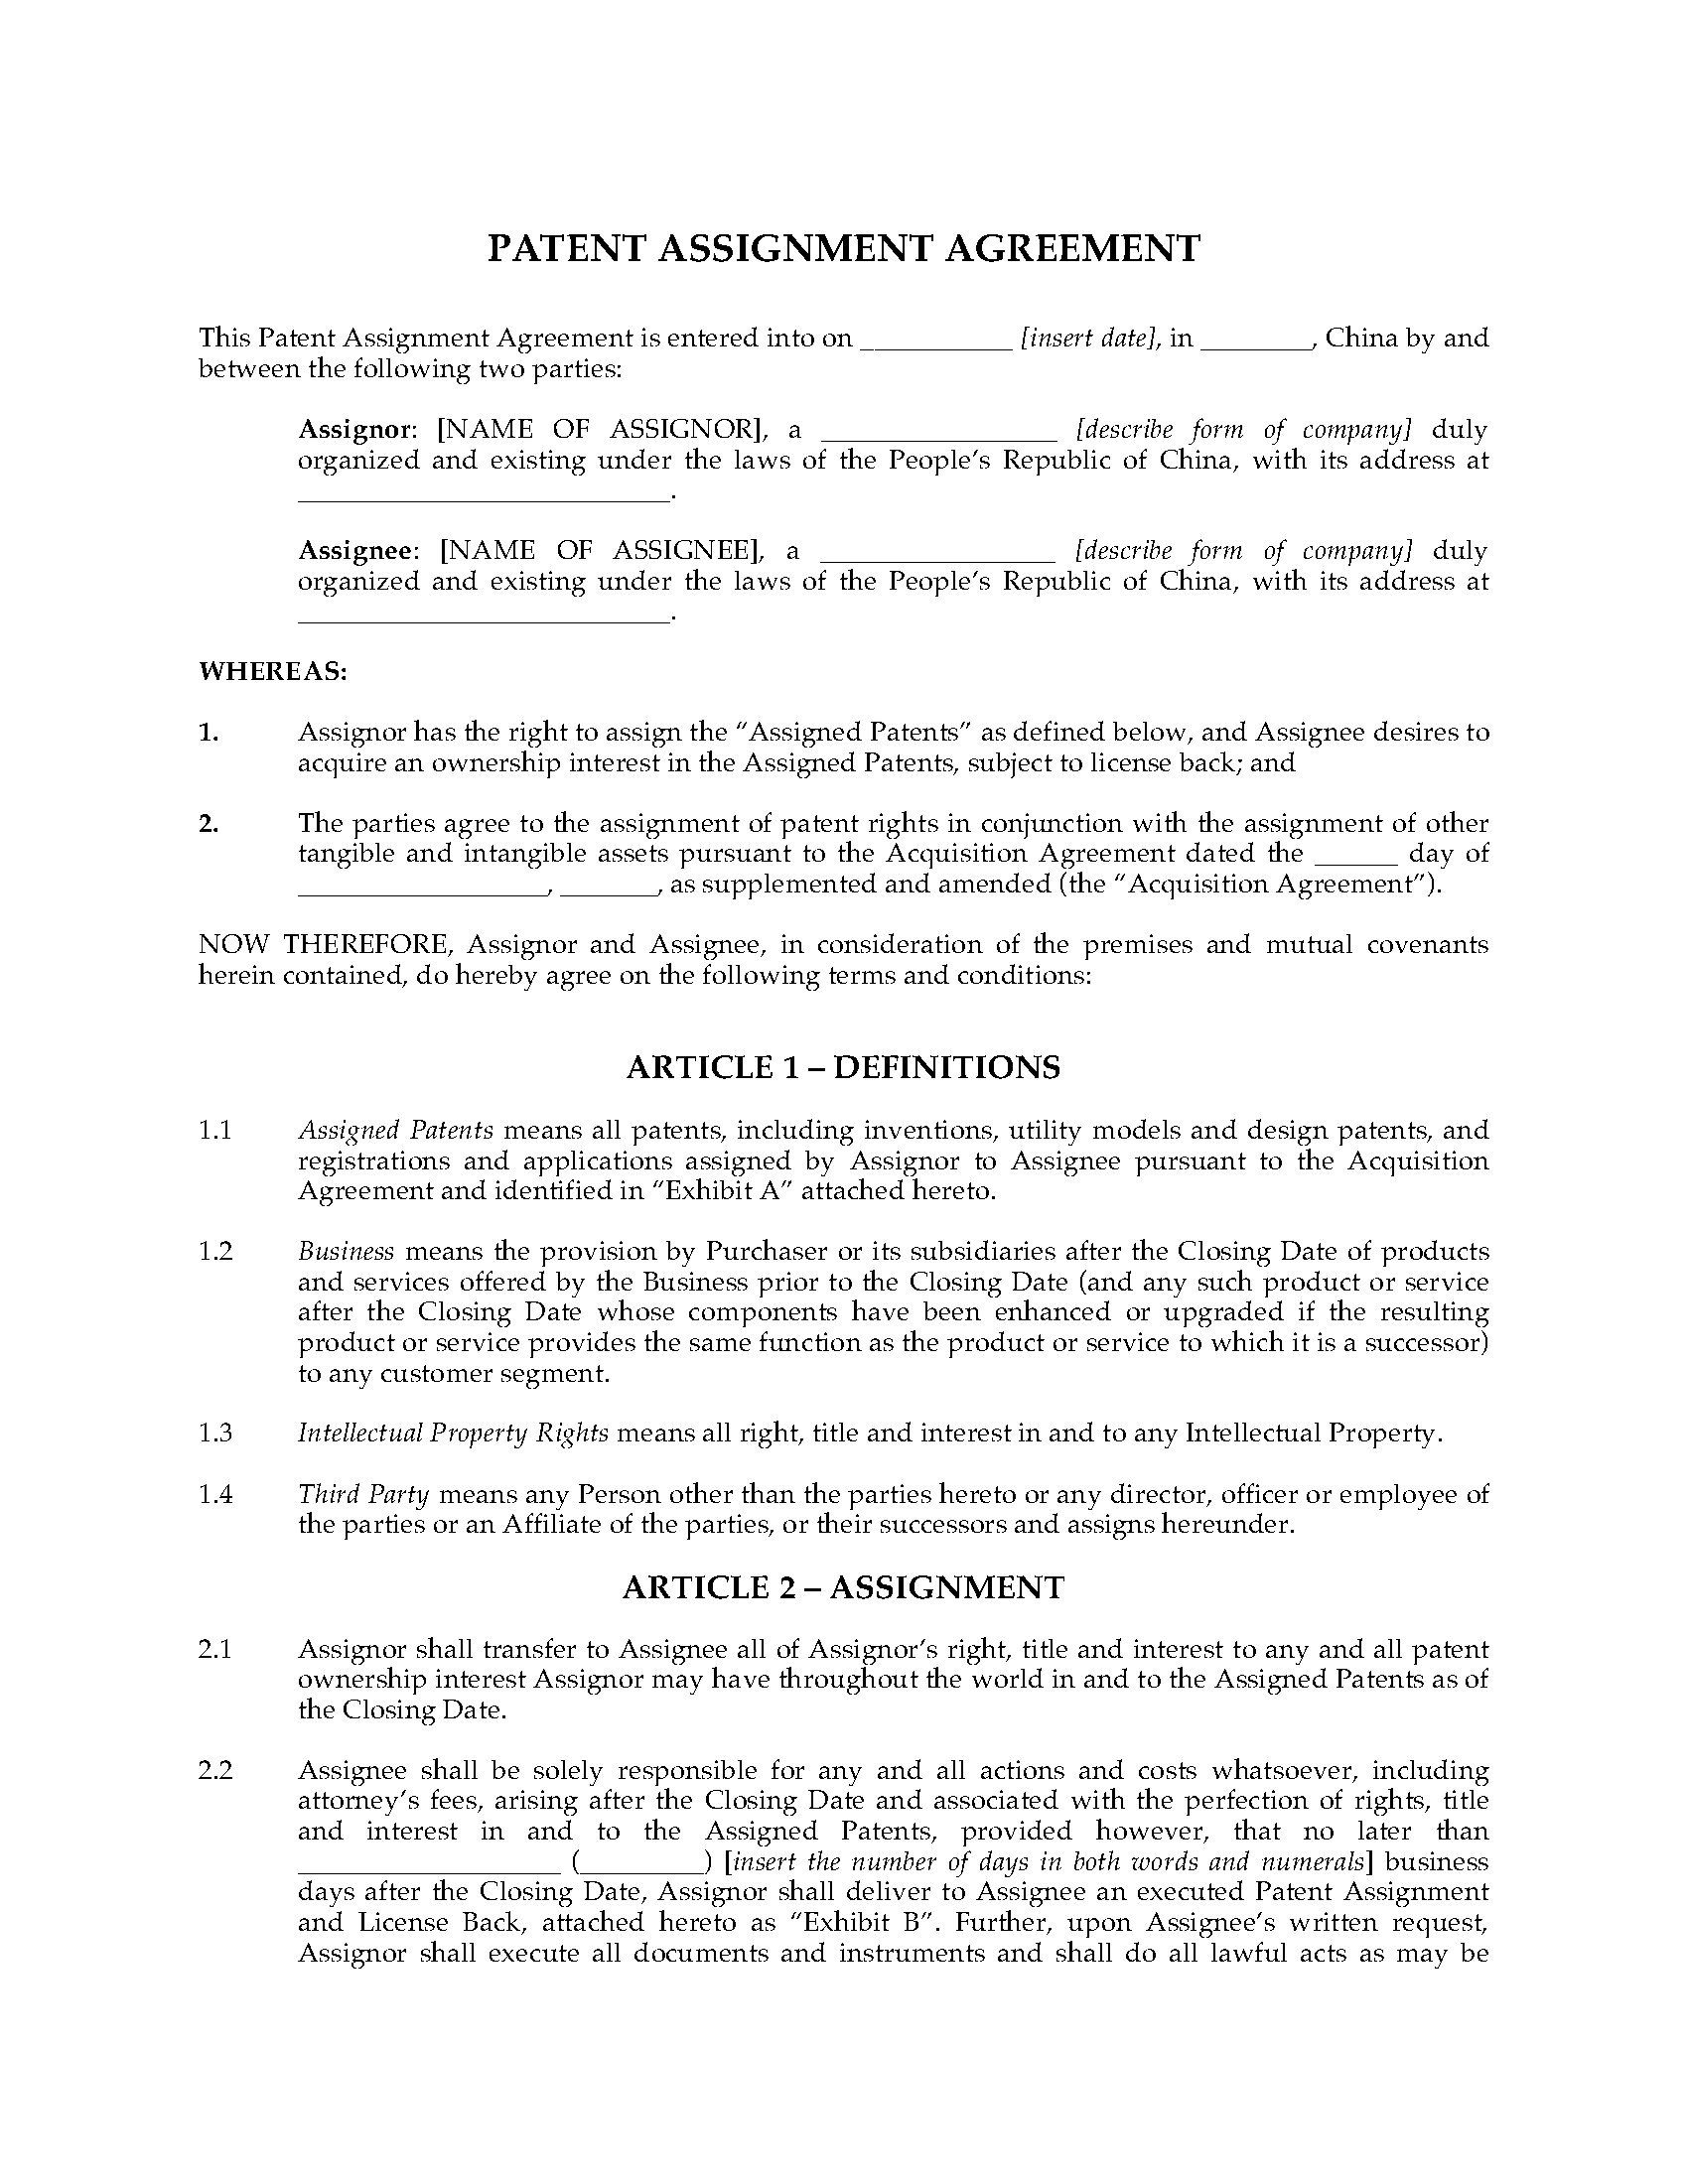 patent assignment agreement sample